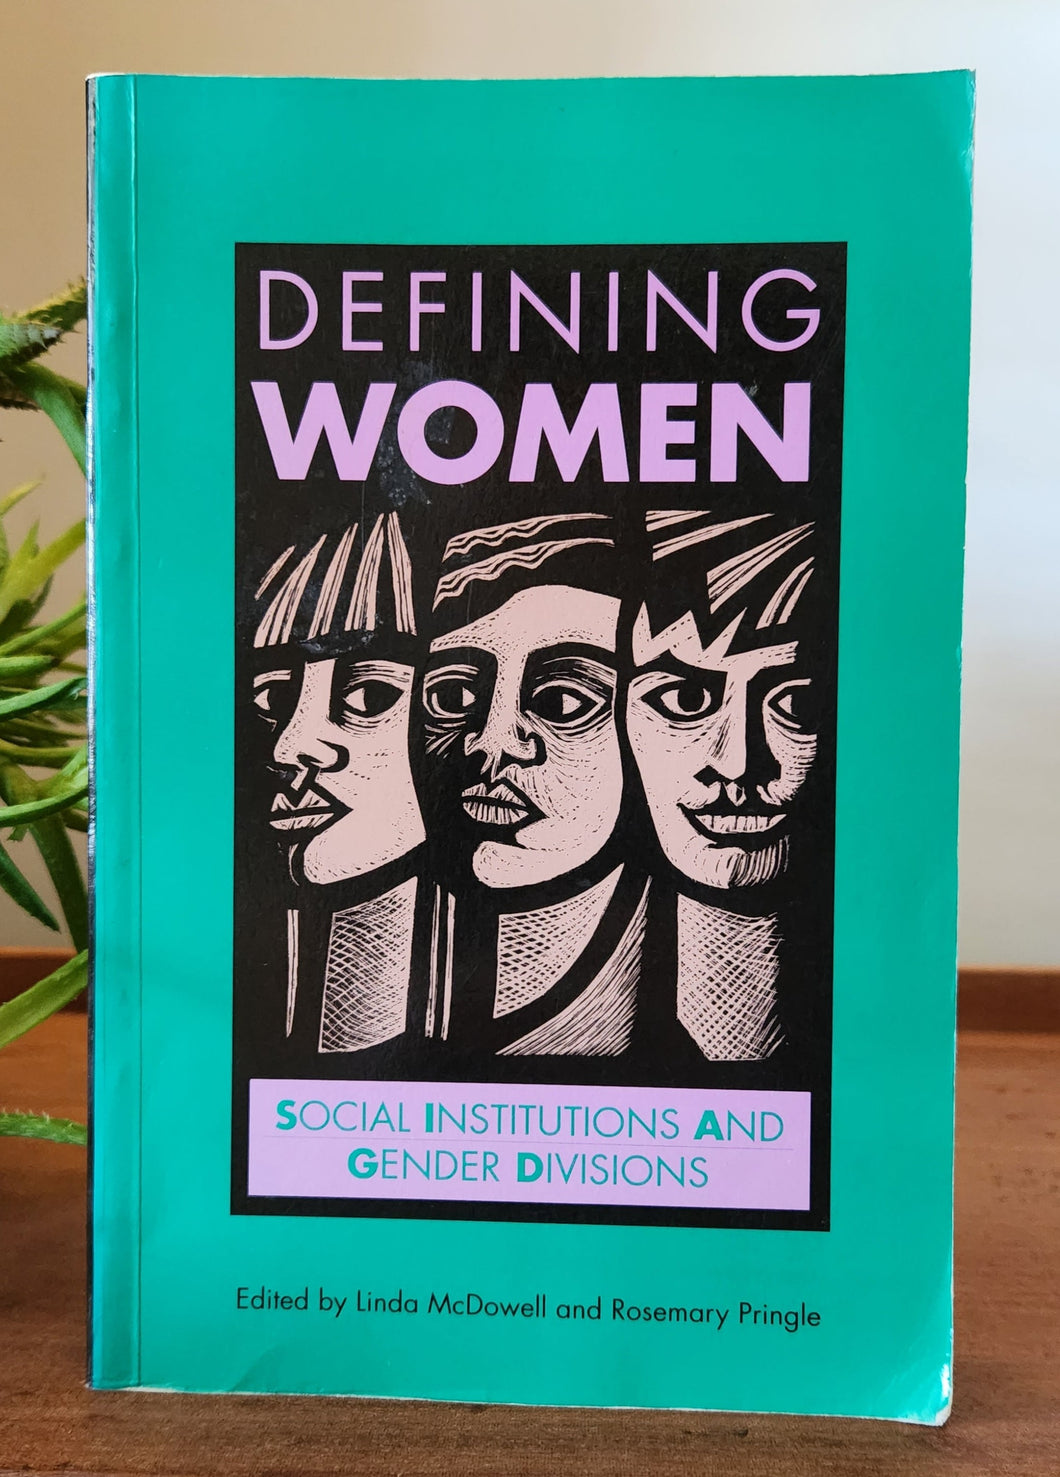 Defining Women: Social Institutions and Gender Divisions Edited by Linda McDowell, Rosemary Pringle